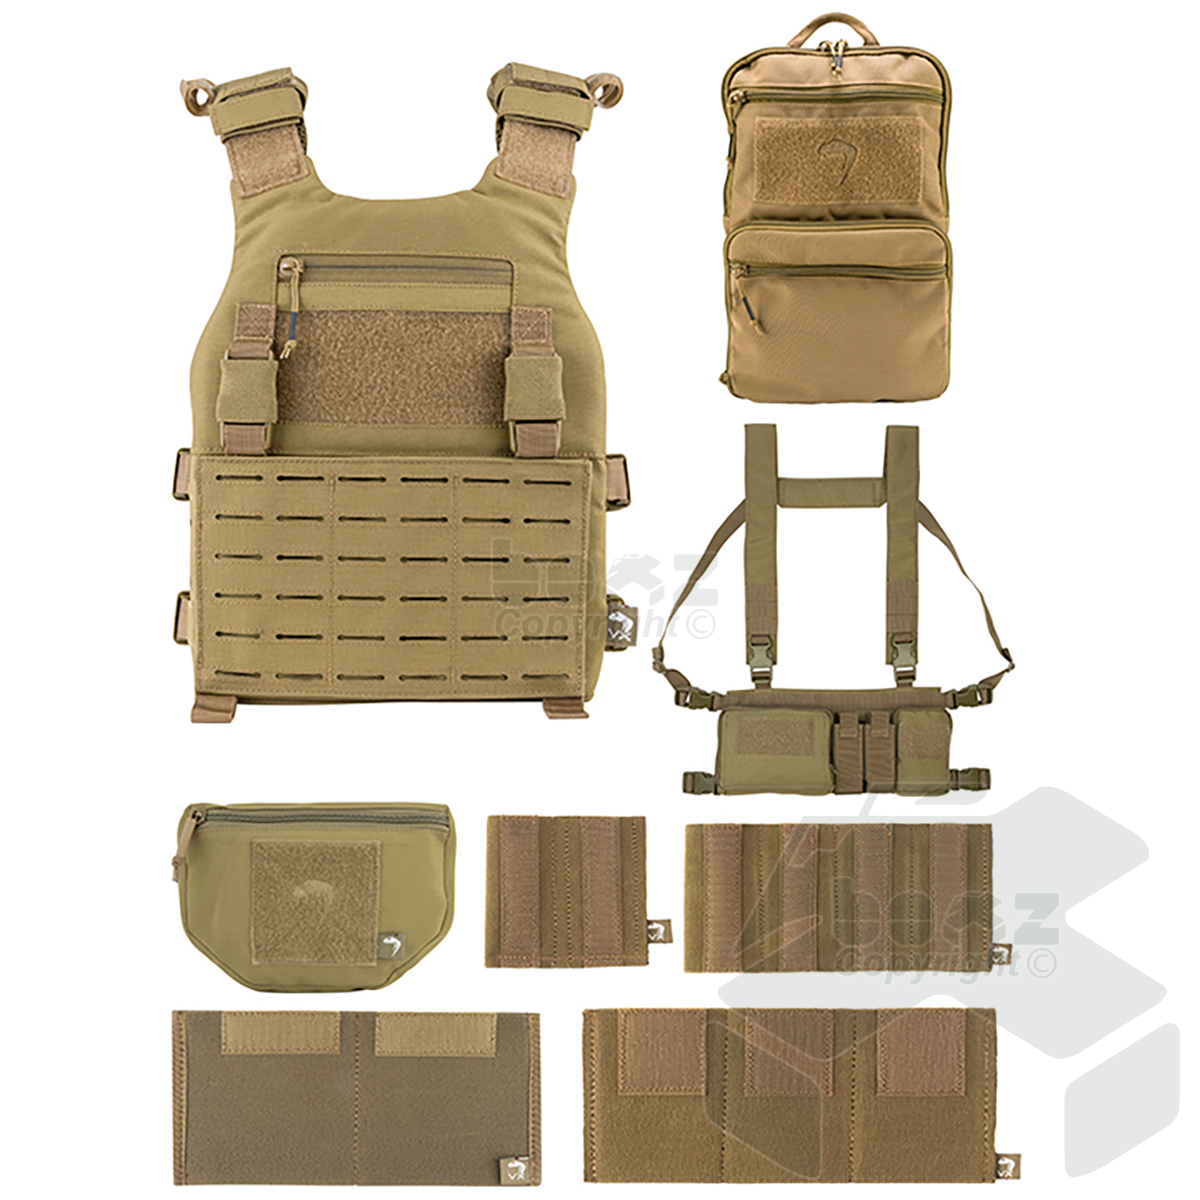 Viper VX Multi Weapon System Set - Coyote